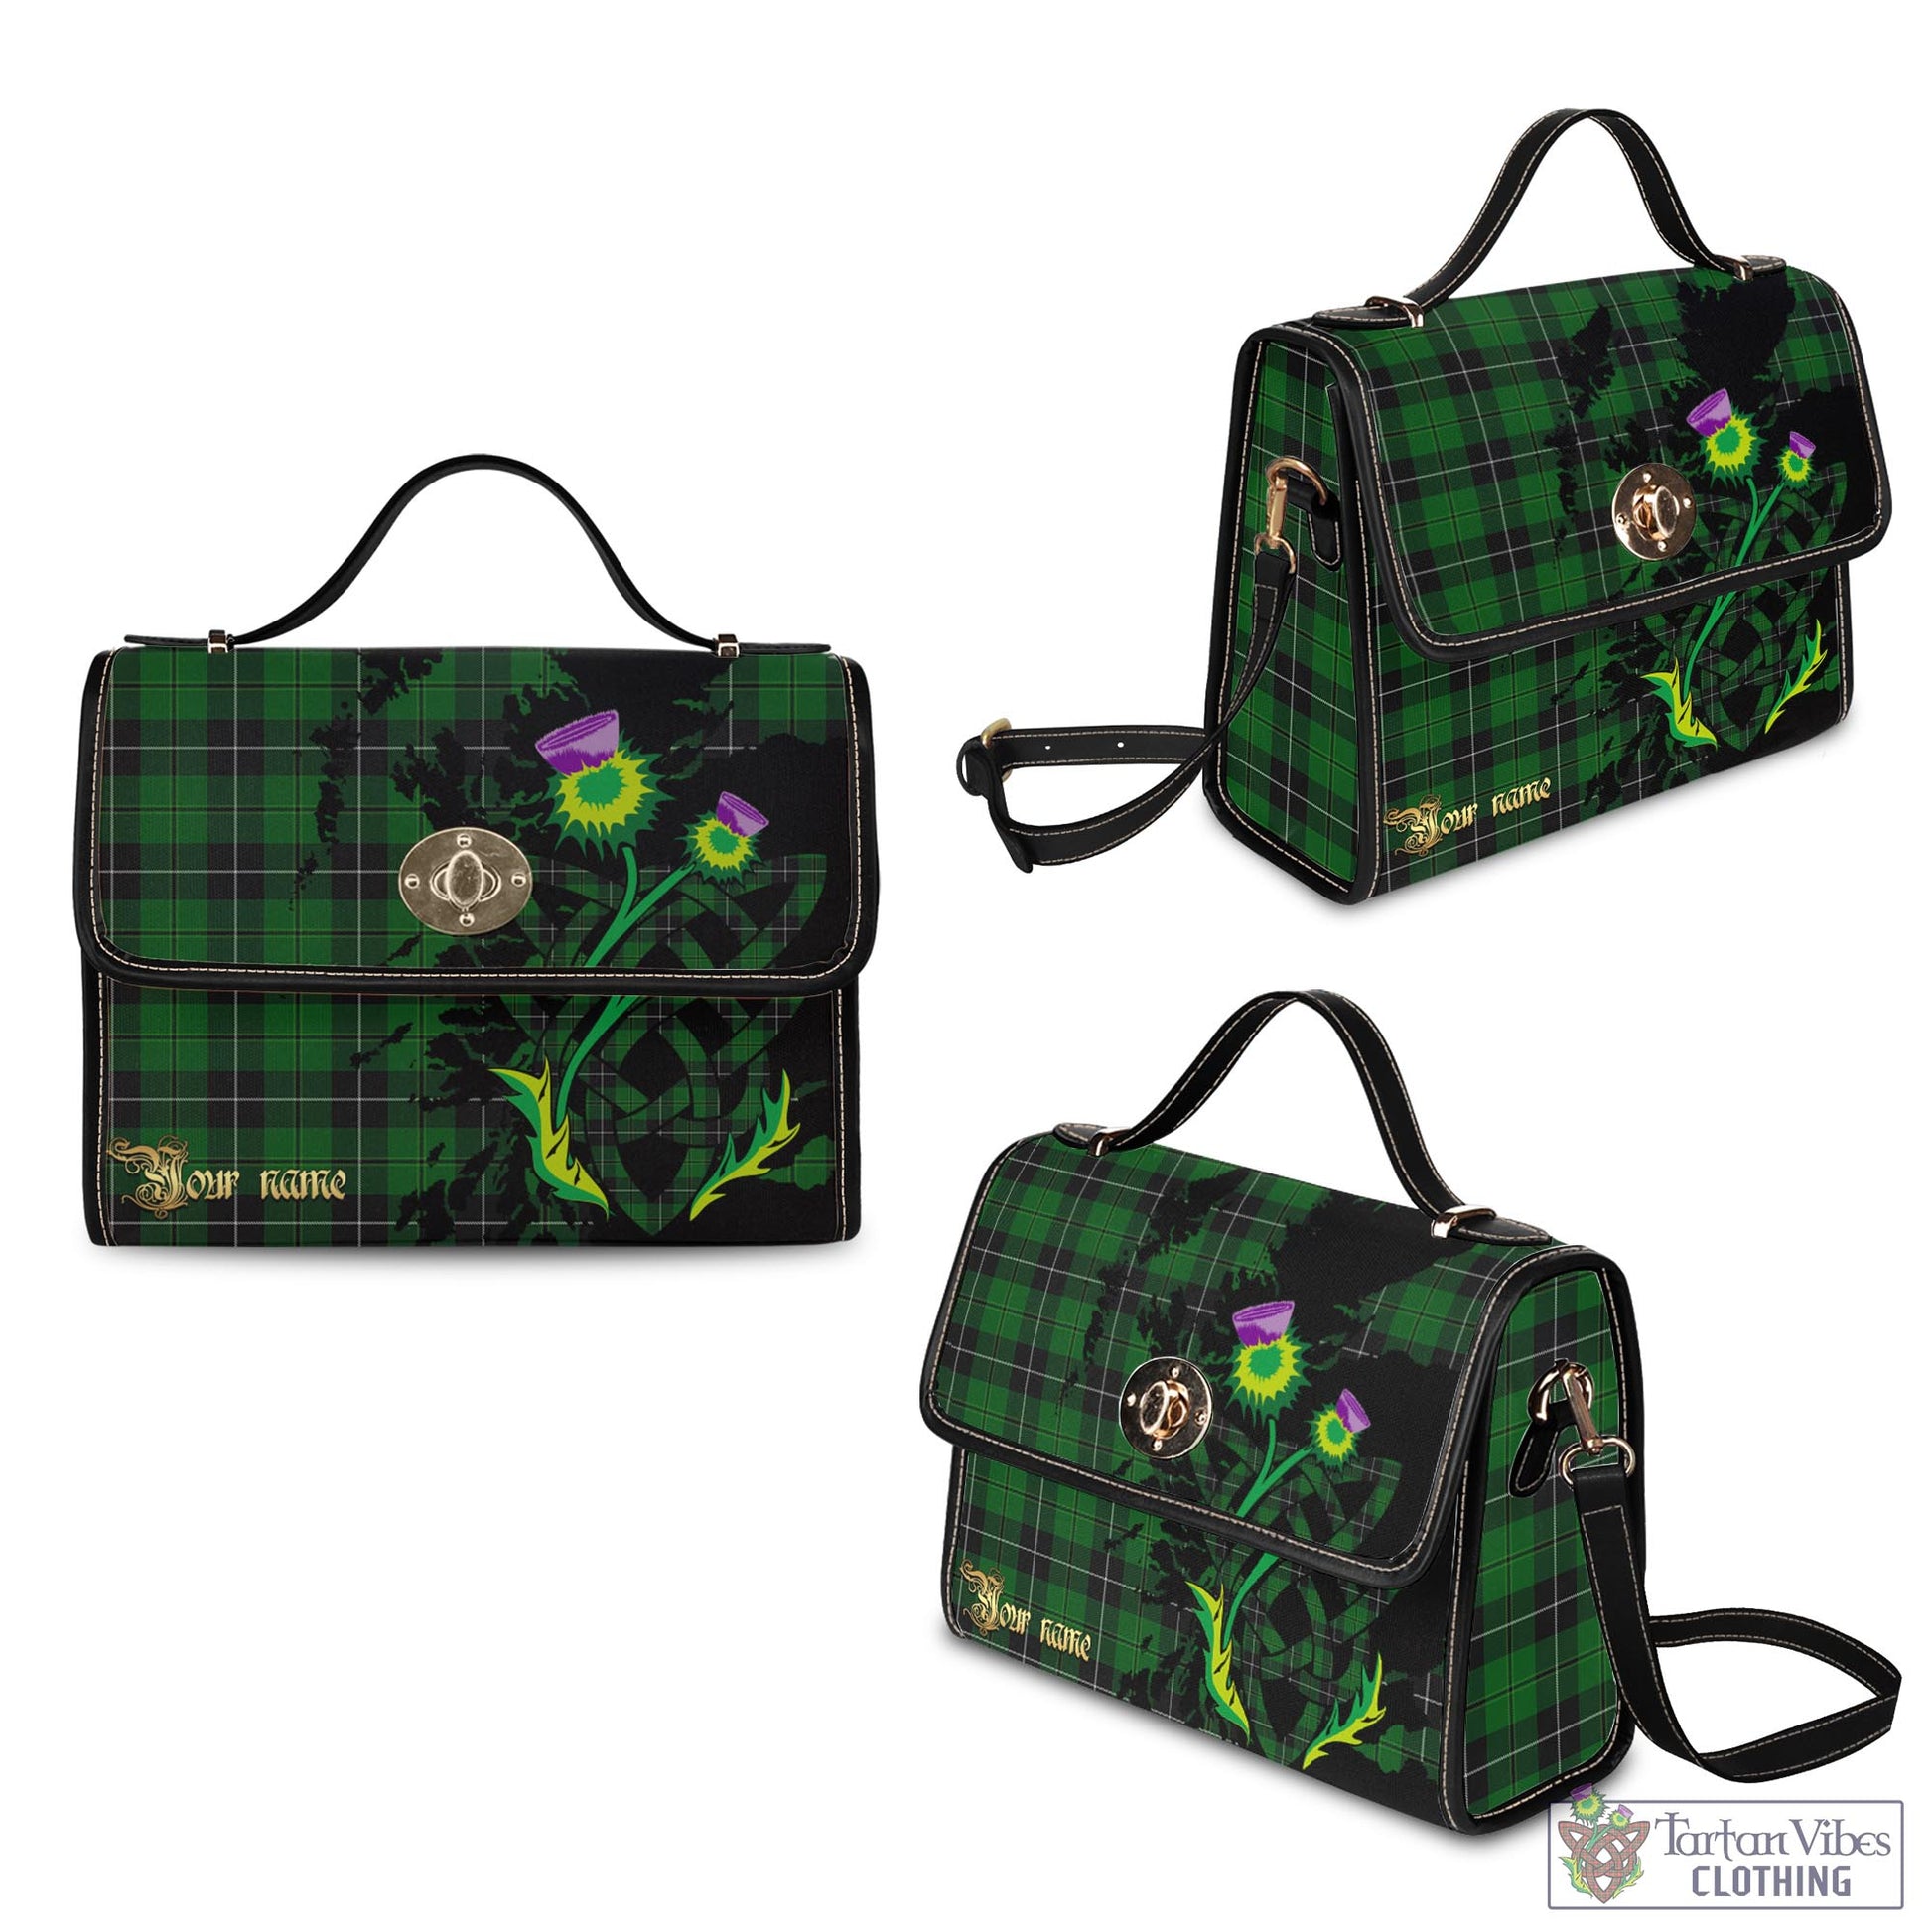 Tartan Vibes Clothing Raeside Tartan Waterproof Canvas Bag with Scotland Map and Thistle Celtic Accents